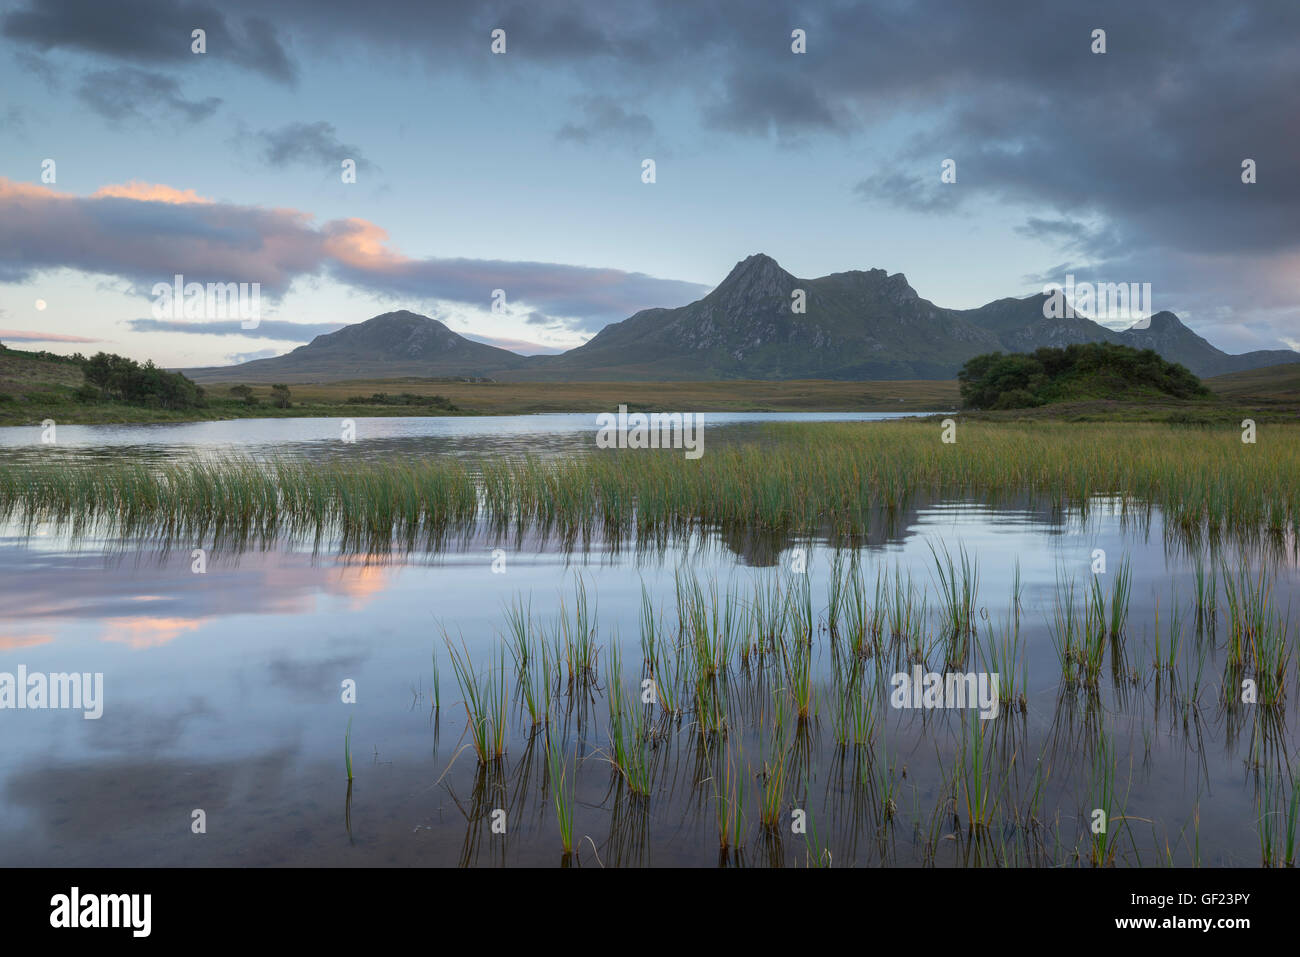 Ben Loyal mountain in Sutherland and Lochan Hakel just after sunset Stock Photo